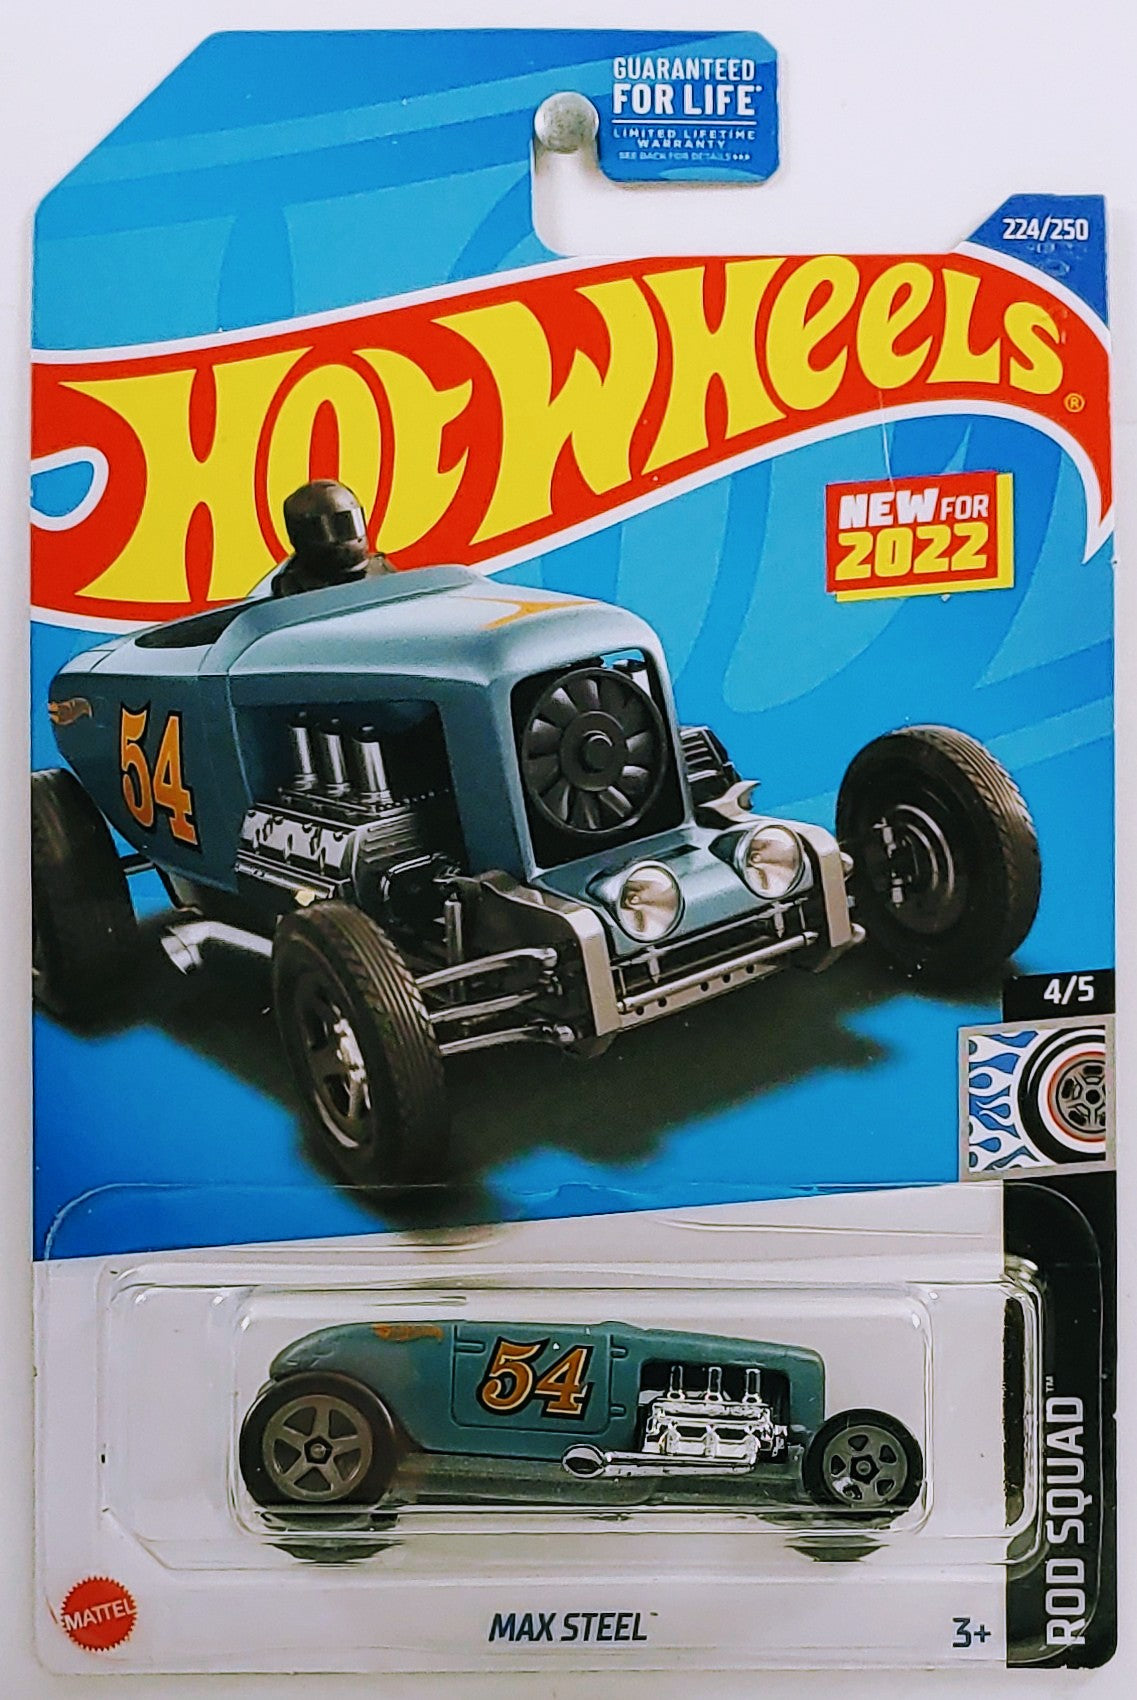 Hot Wheels 2022 - Collector # 224/250 - Rod Squad 4/5 - New Models - Max Steel - Matte Blue Gray - USA